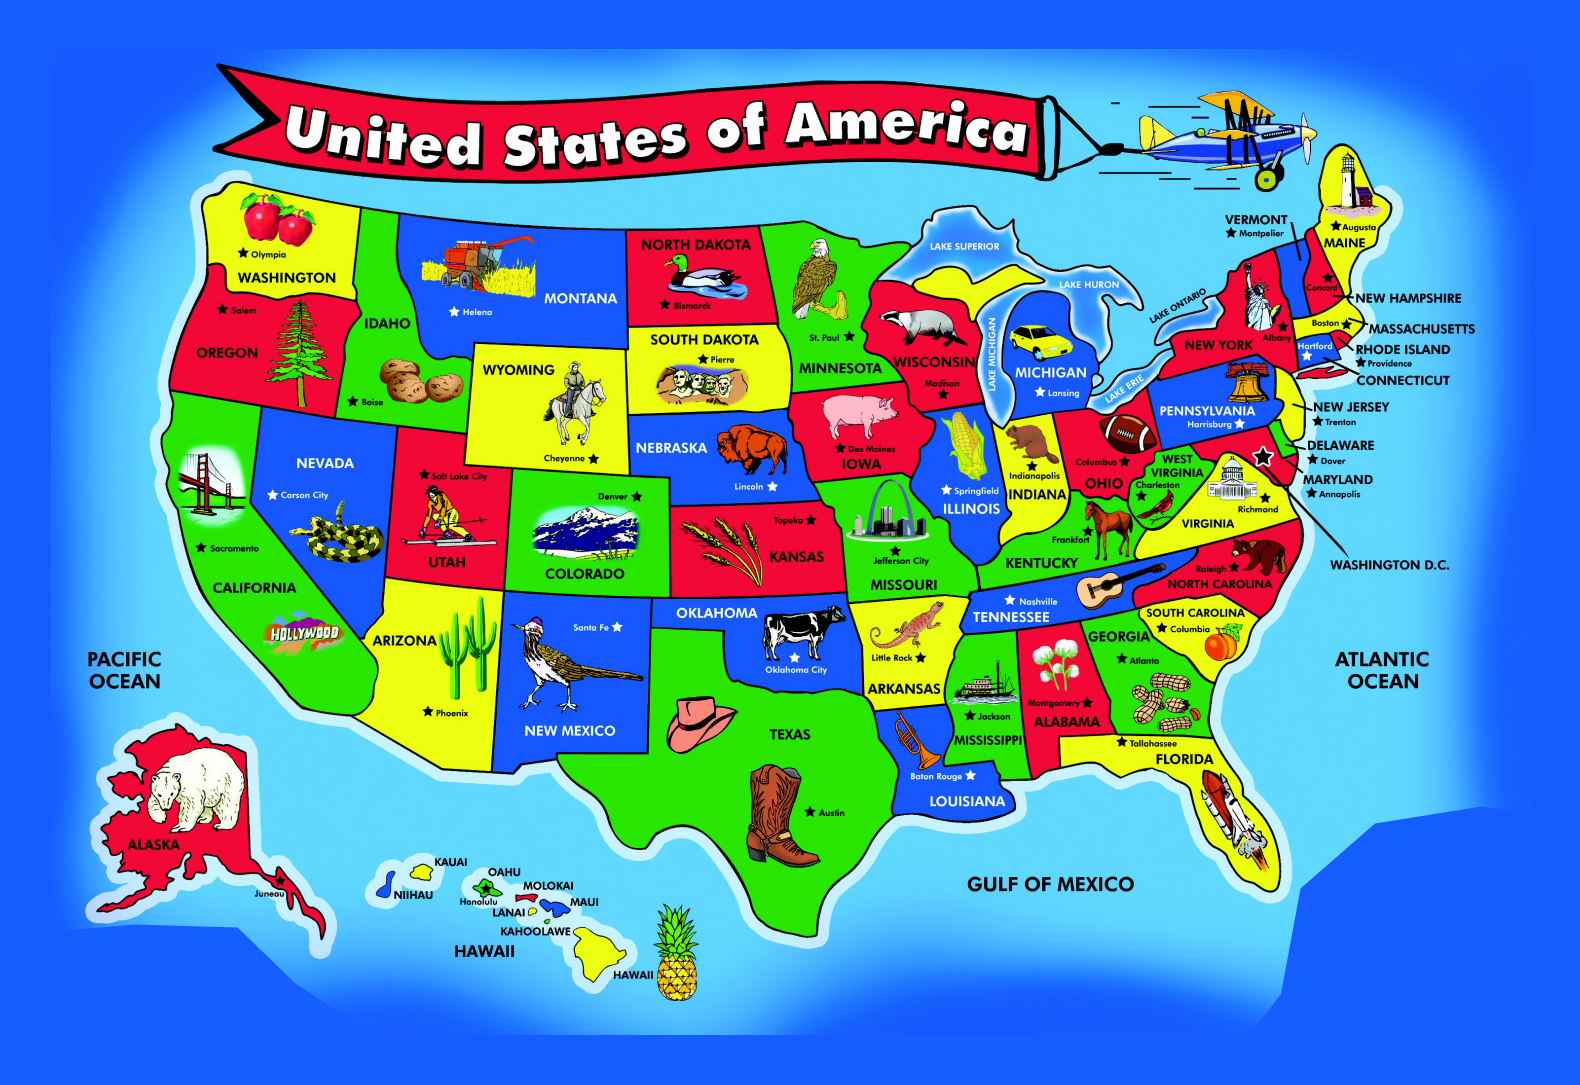 childrens-map-of-the-united-states-living-room-design-2020